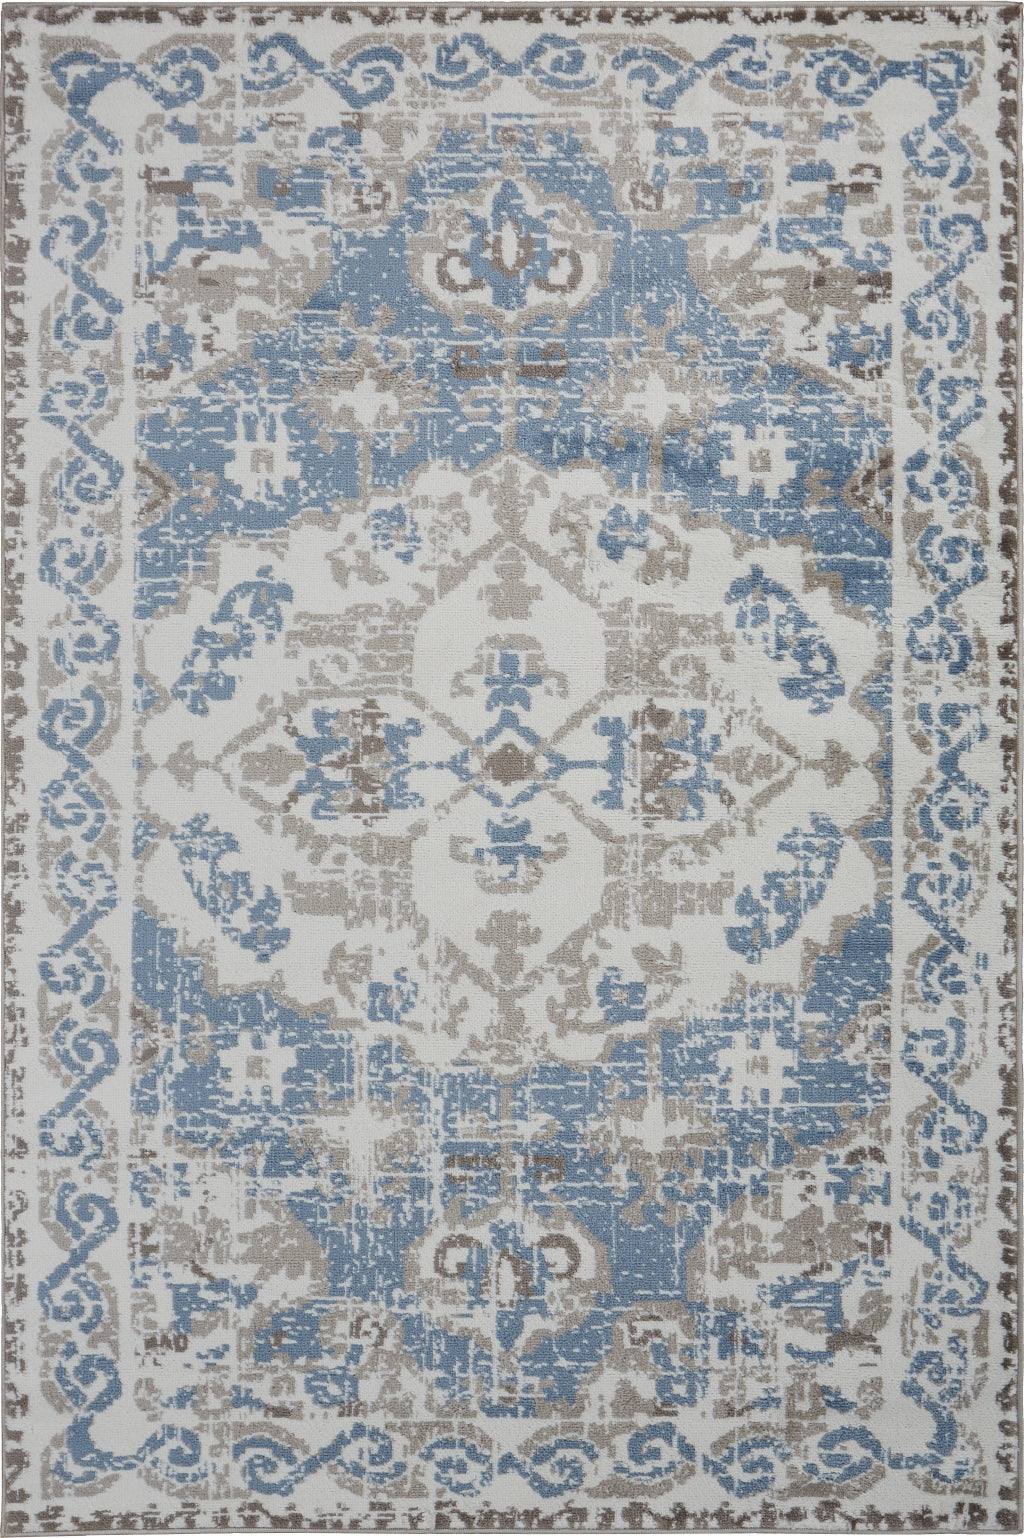 LR Resources Infinity 81317 White/Light Blue Area Rug main image